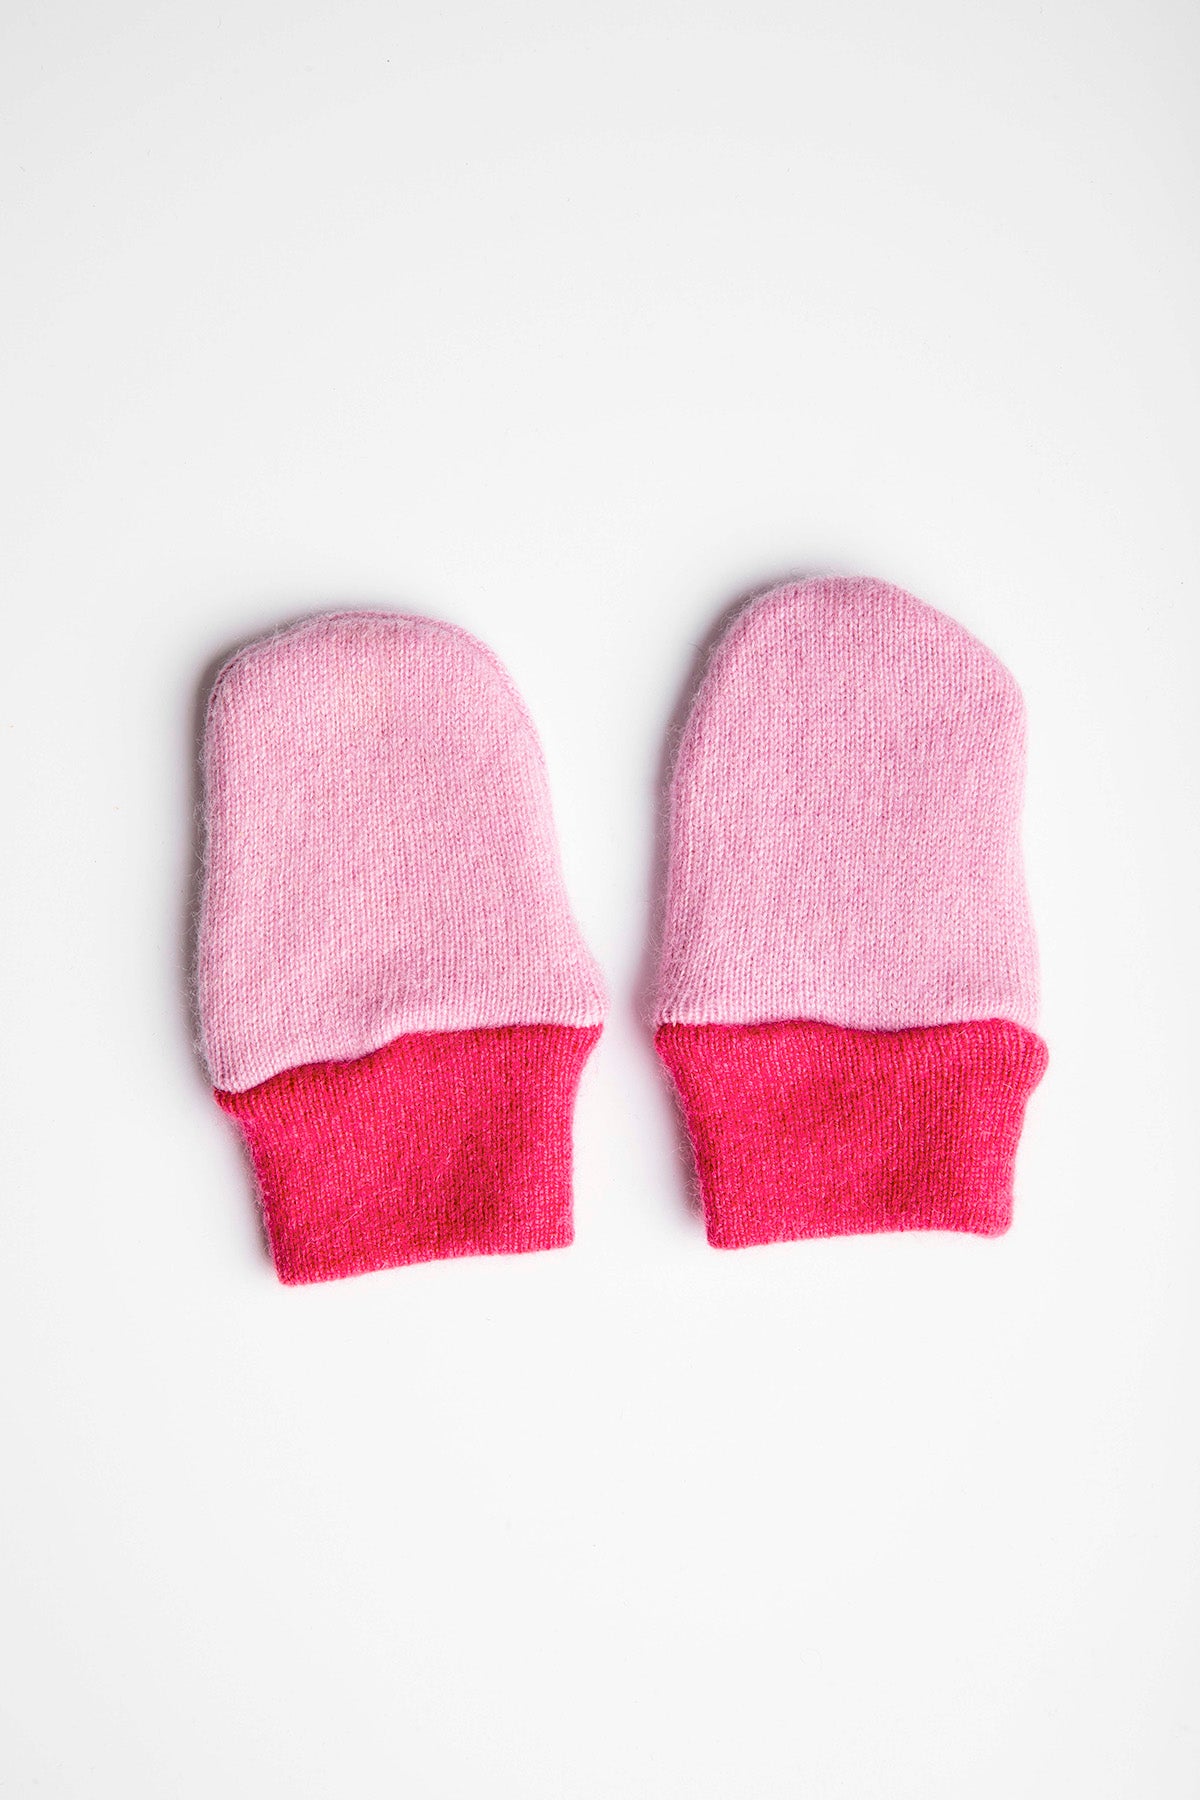 Pink Baby Set - Mittens, Booties and Hat